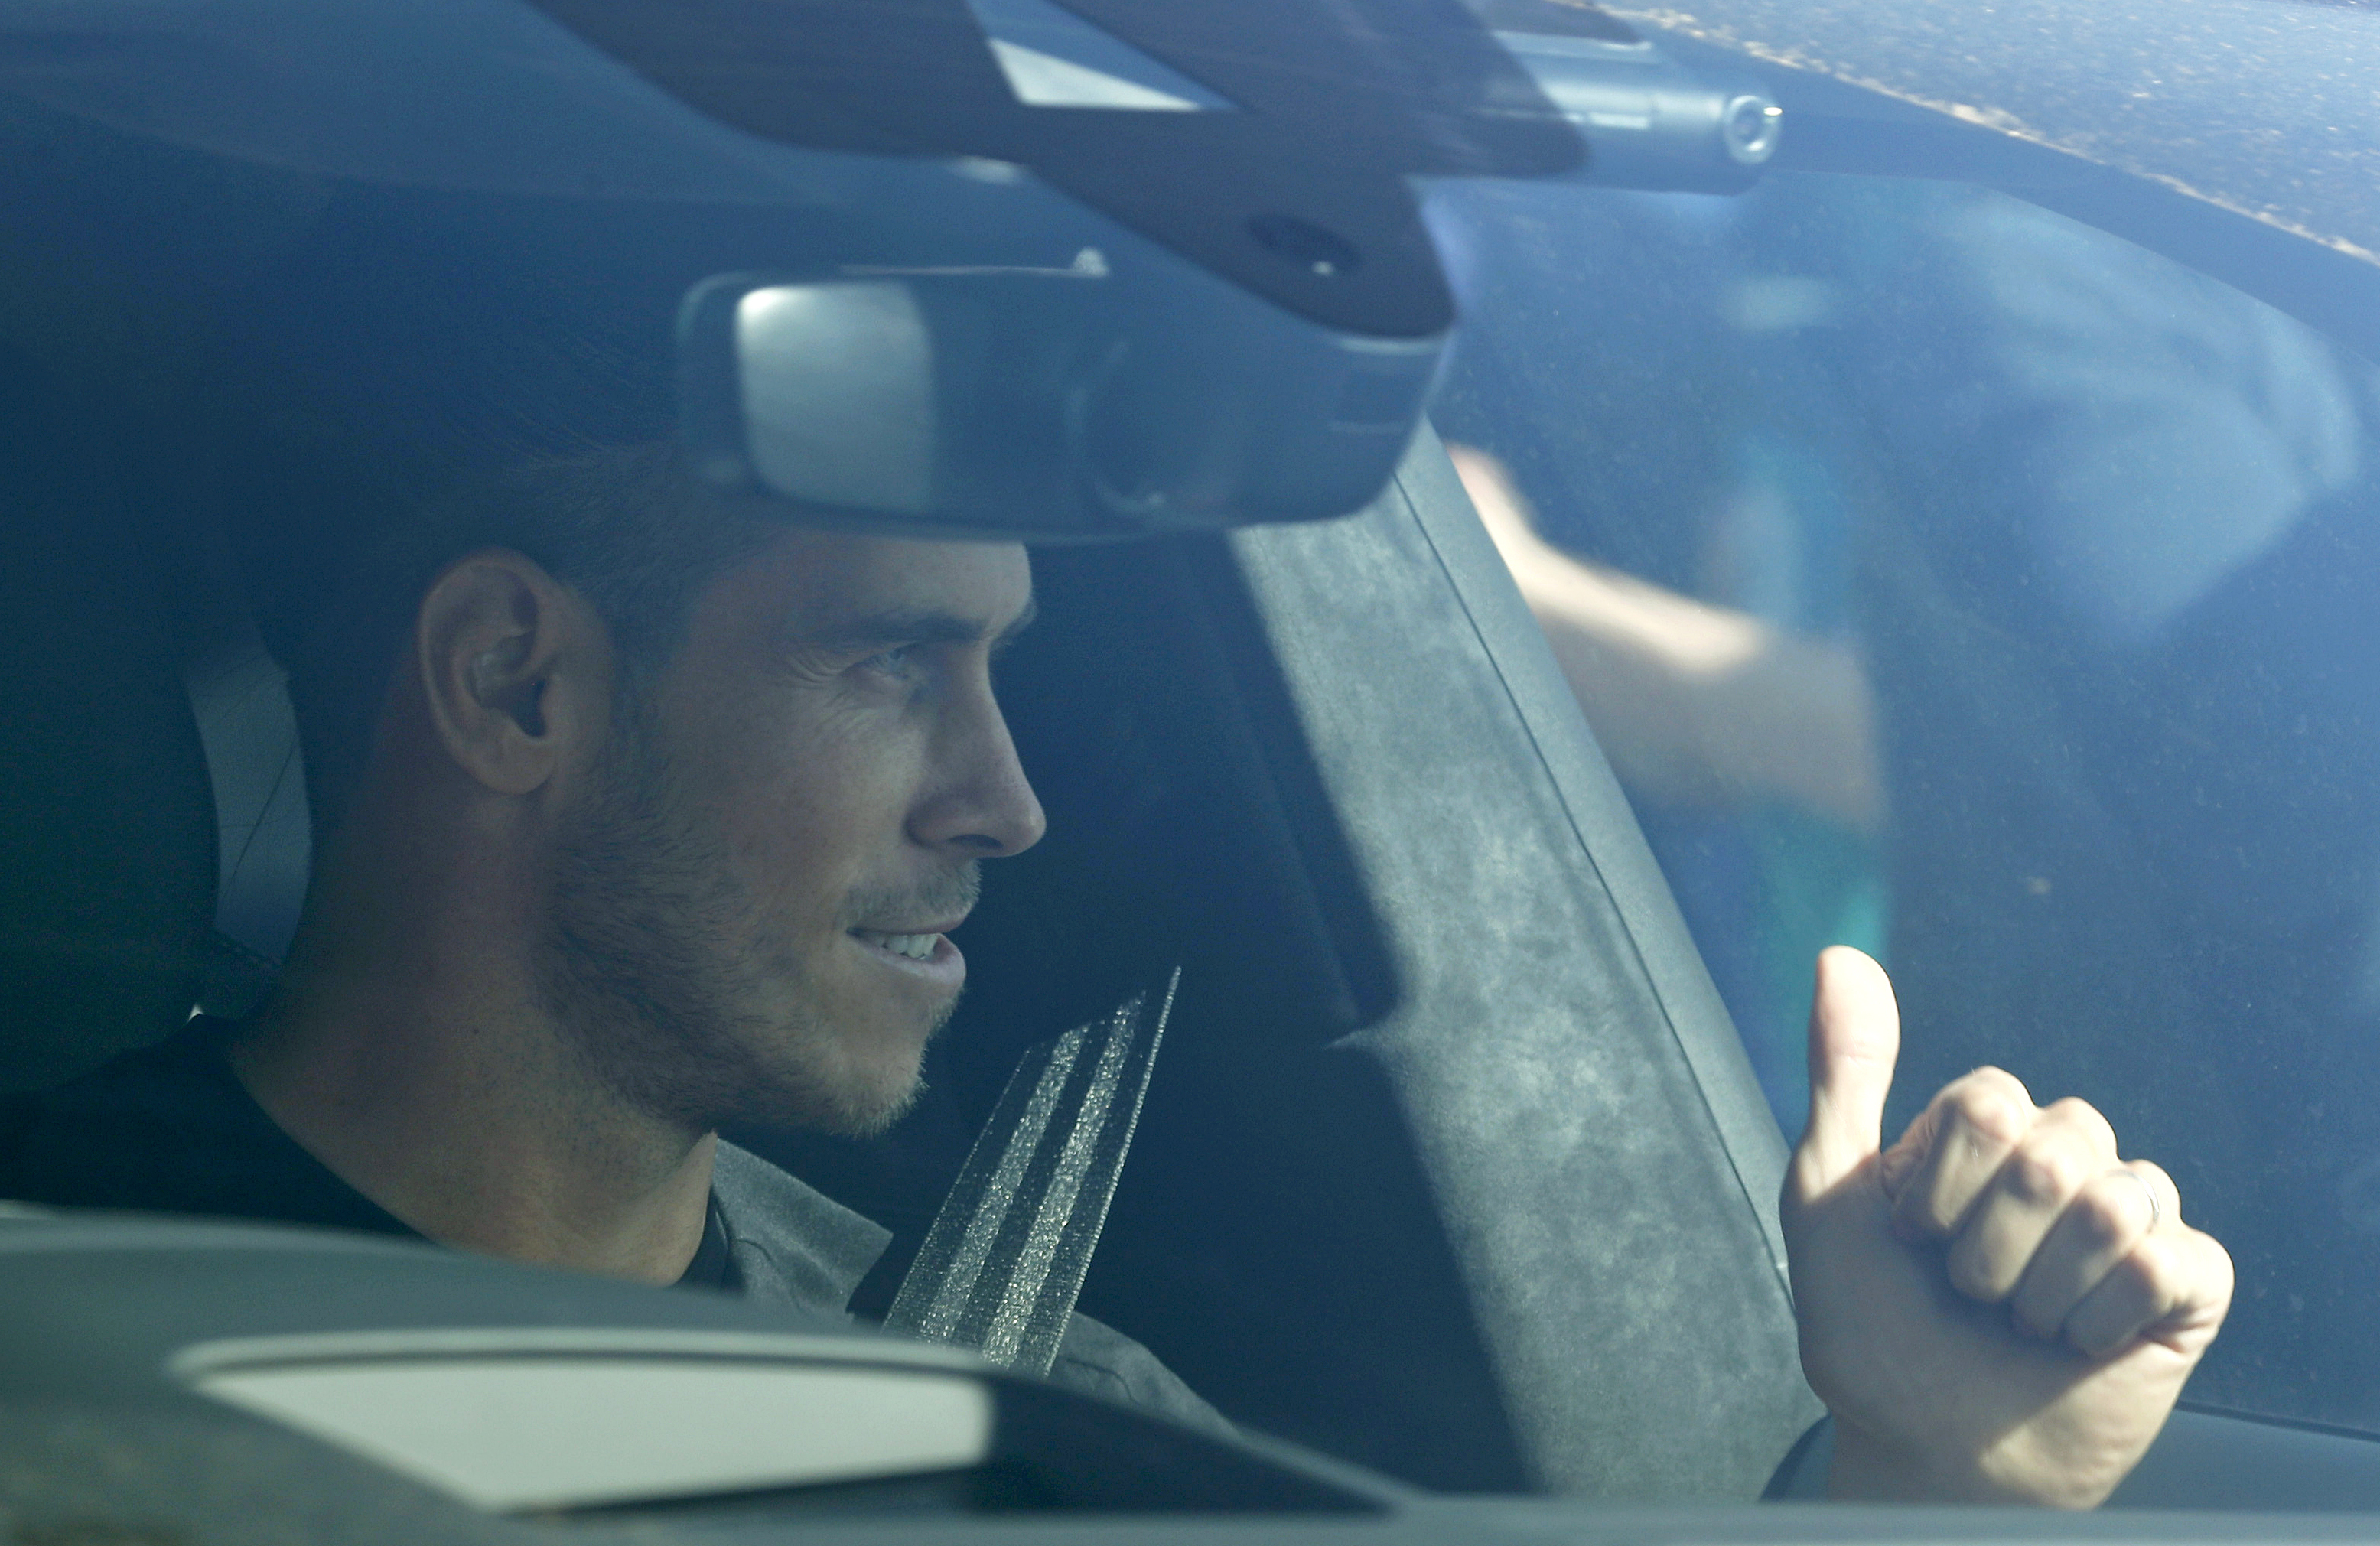 Gareth Bale arrived at the training ground on Friday